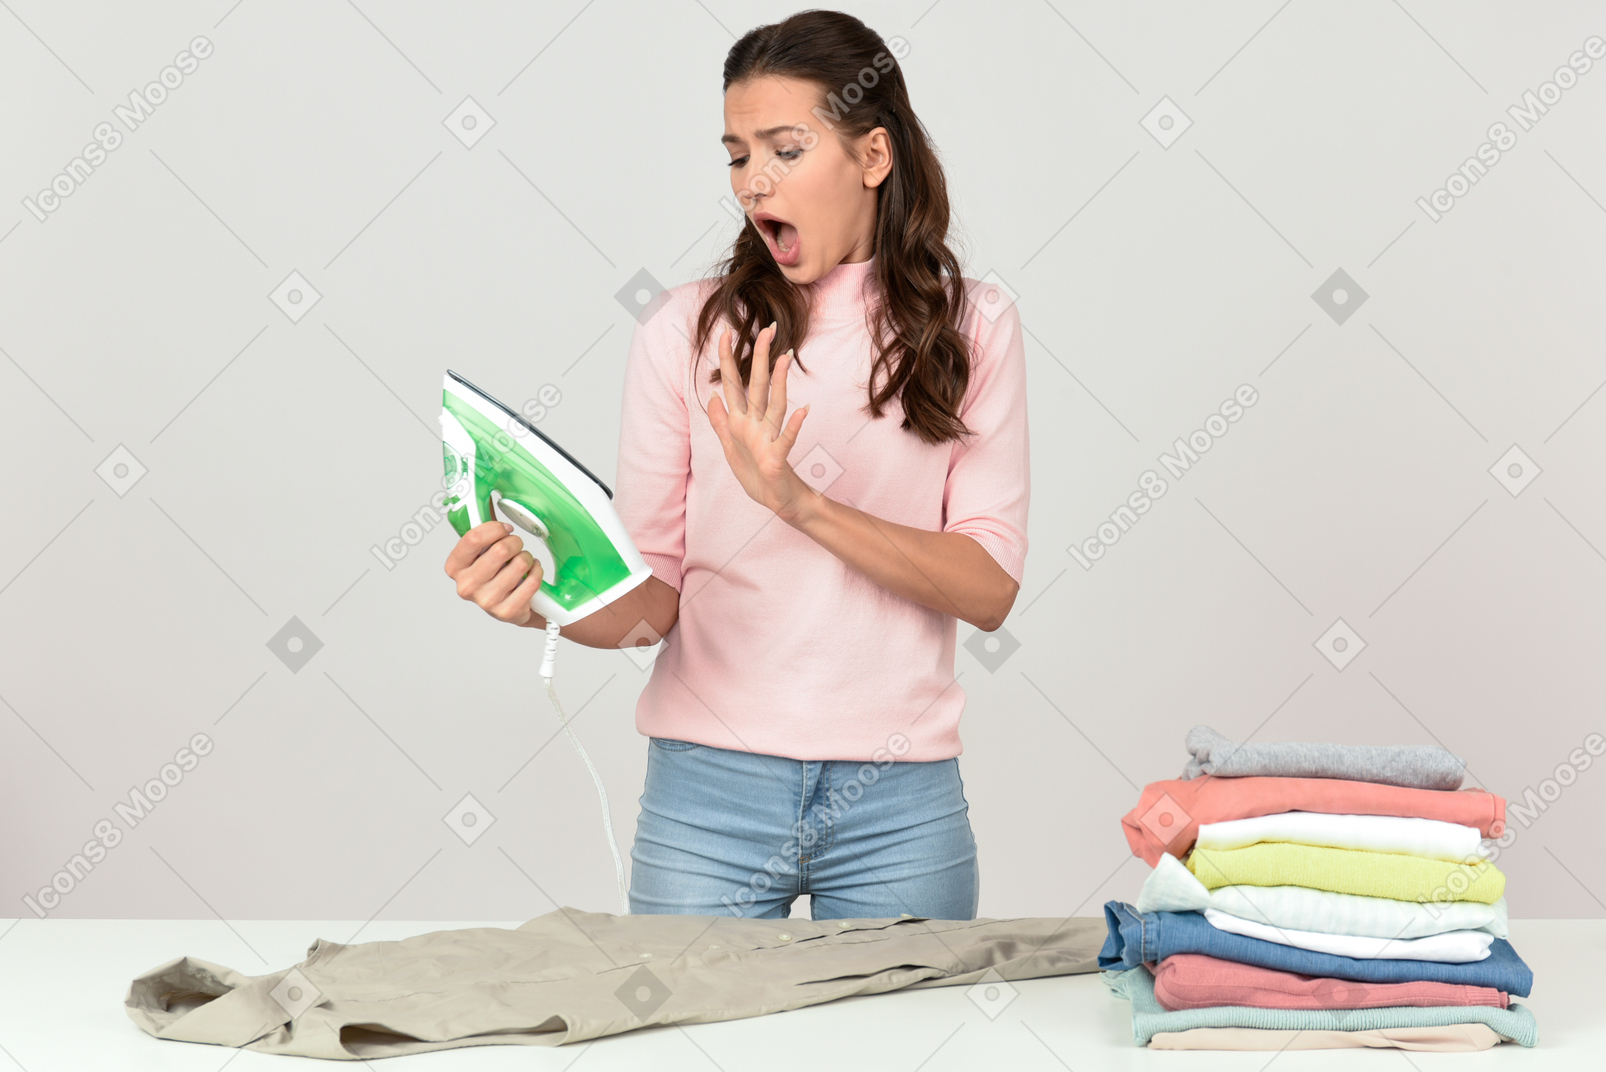 Ironing is my least favorite chore